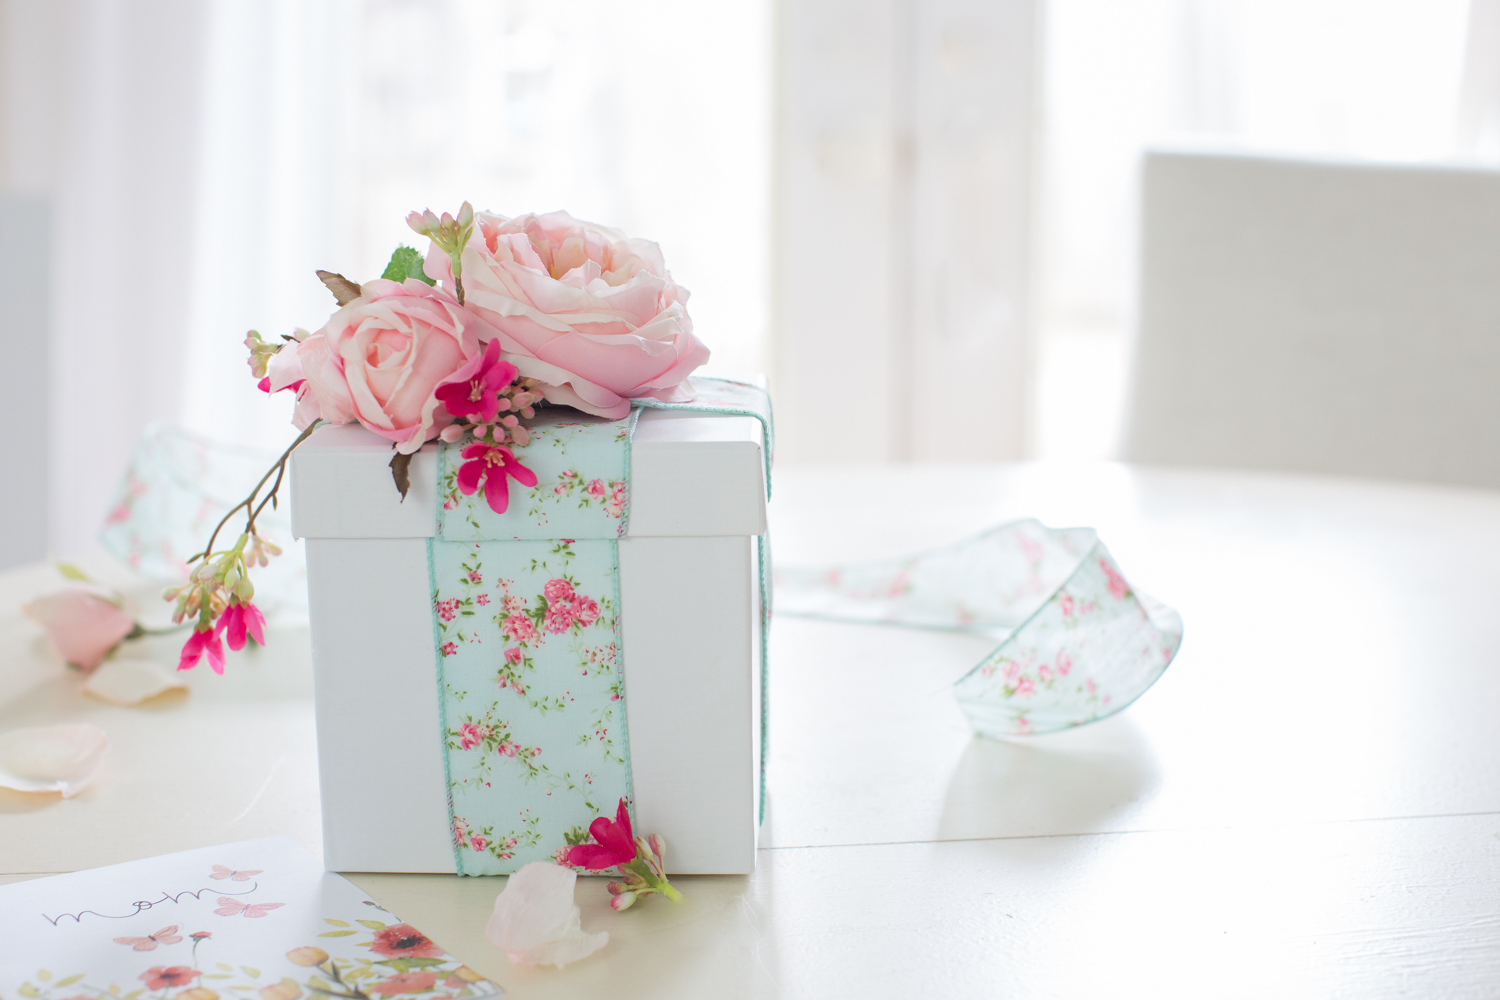 Present stand. Present Flowers. Paper Wrapped Gift Box Scene.